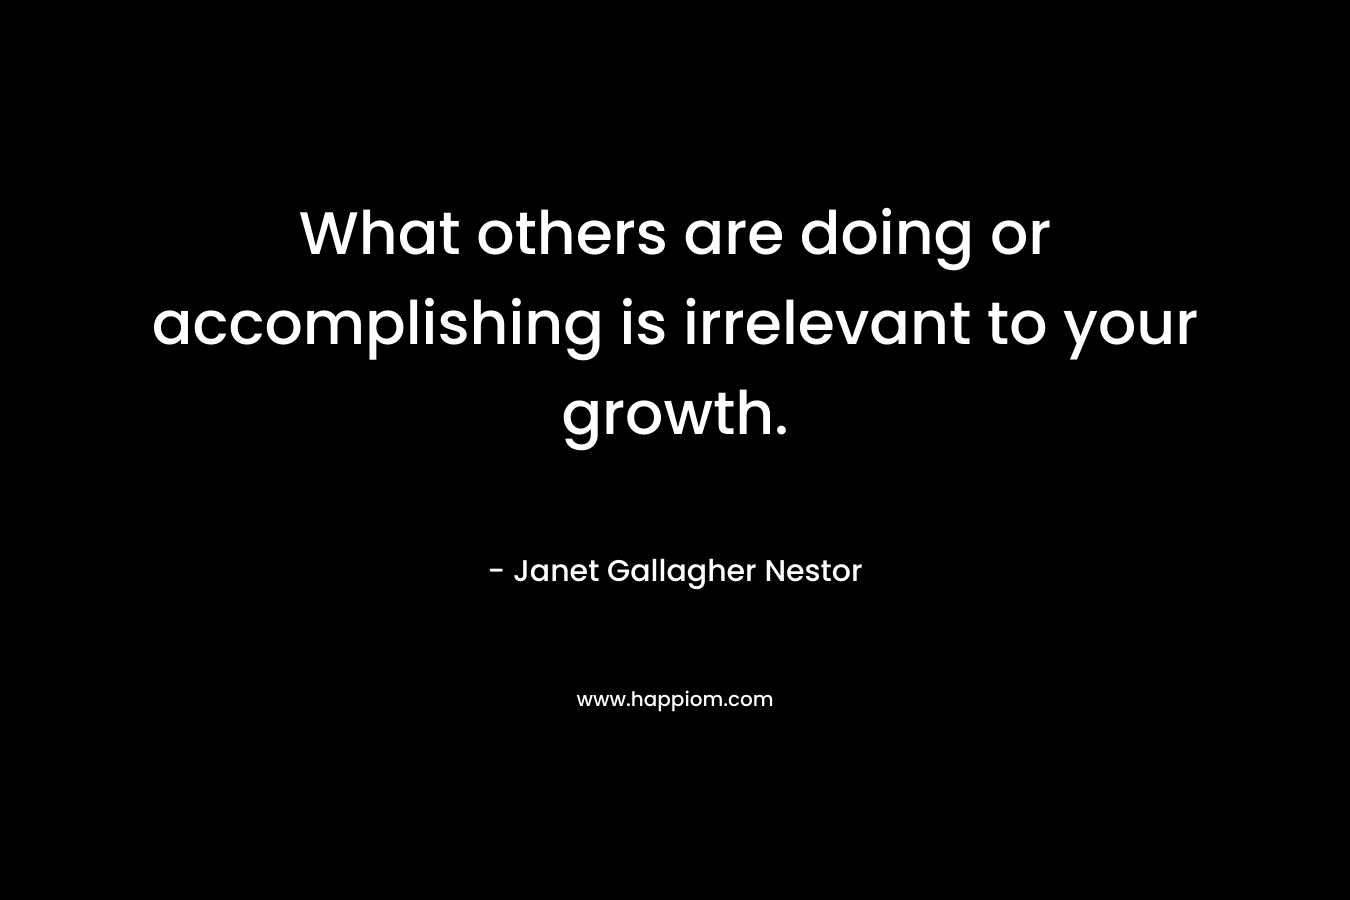 What others are doing or accomplishing is irrelevant to your growth.